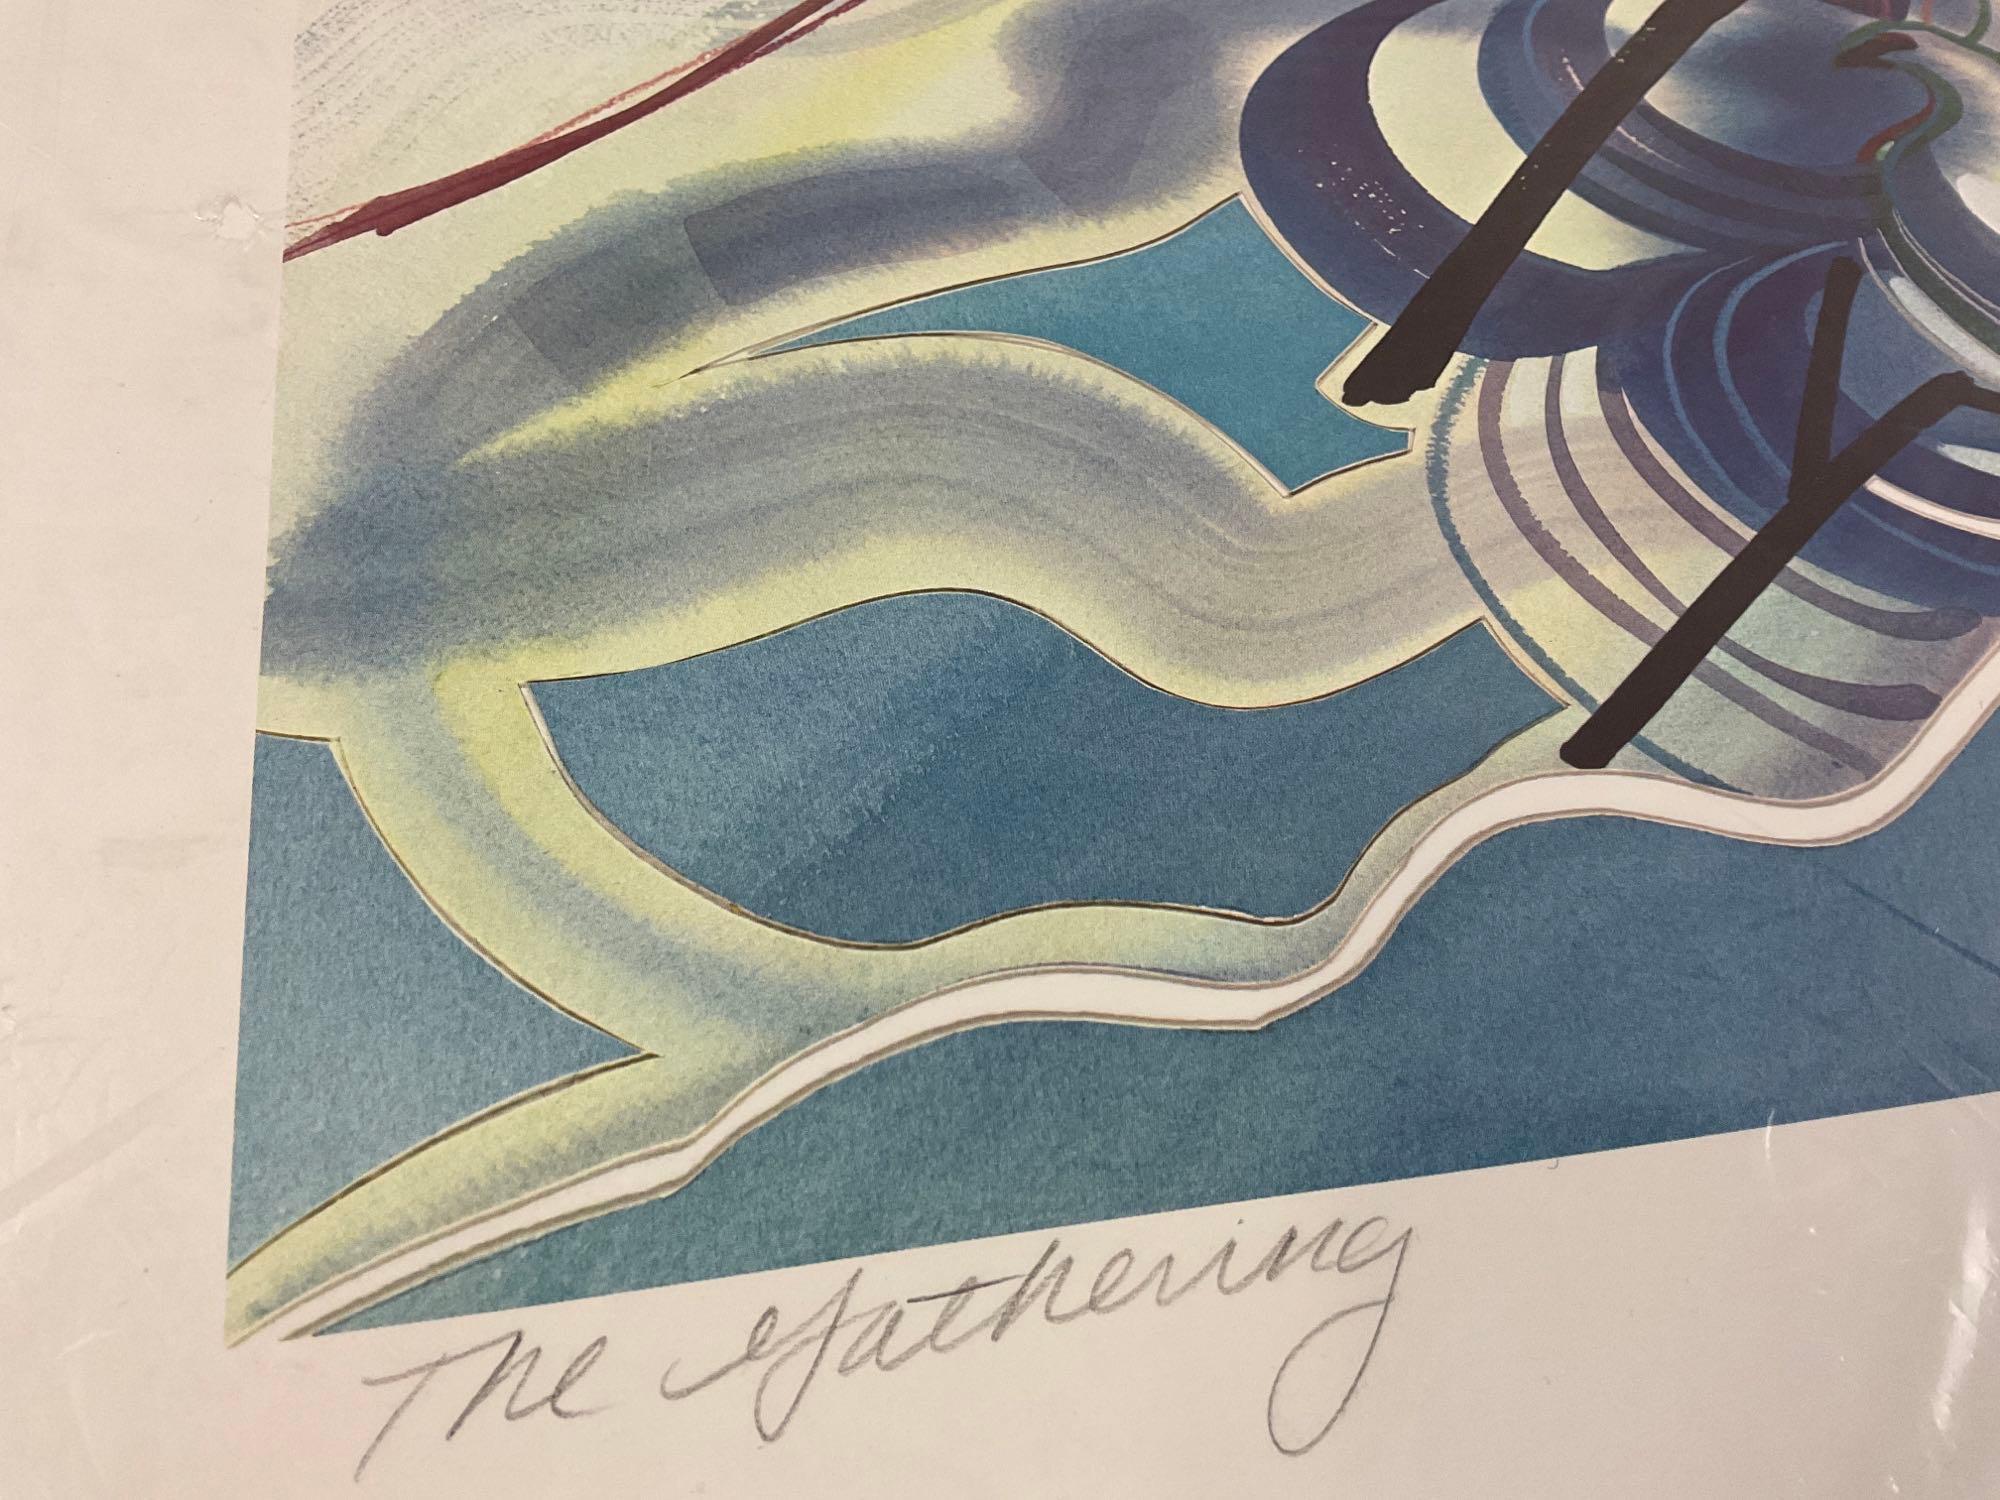 Signed / numbered art print THE GATHERING by Ann Militich-Warder, #ed 87/500